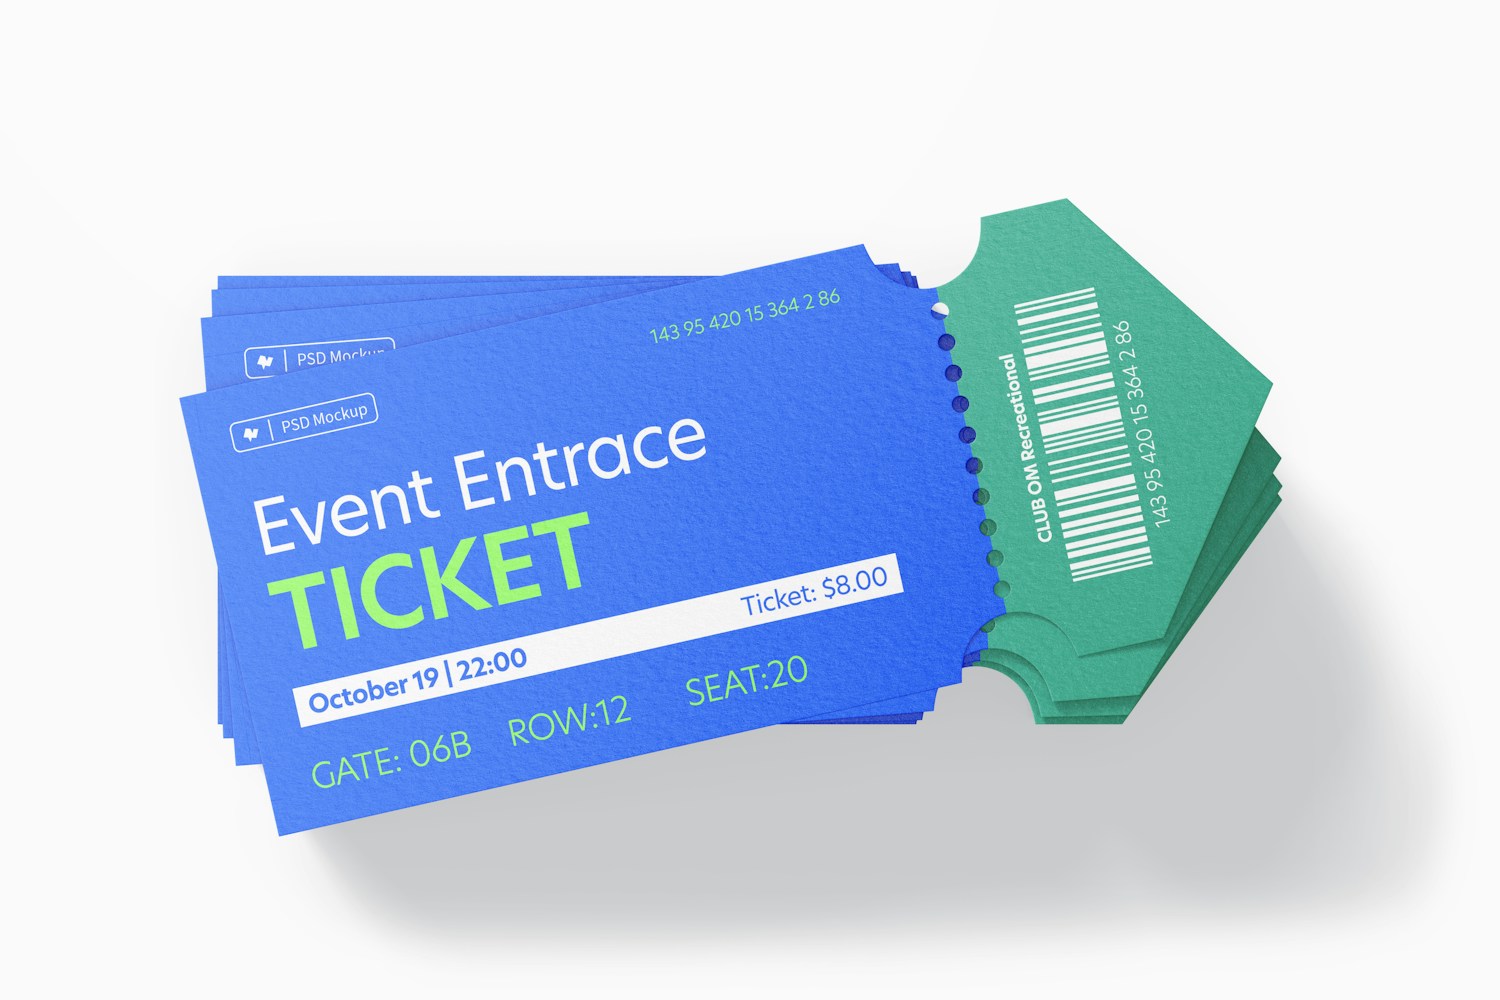 Event Entrance Ticket Mockup, Stacked